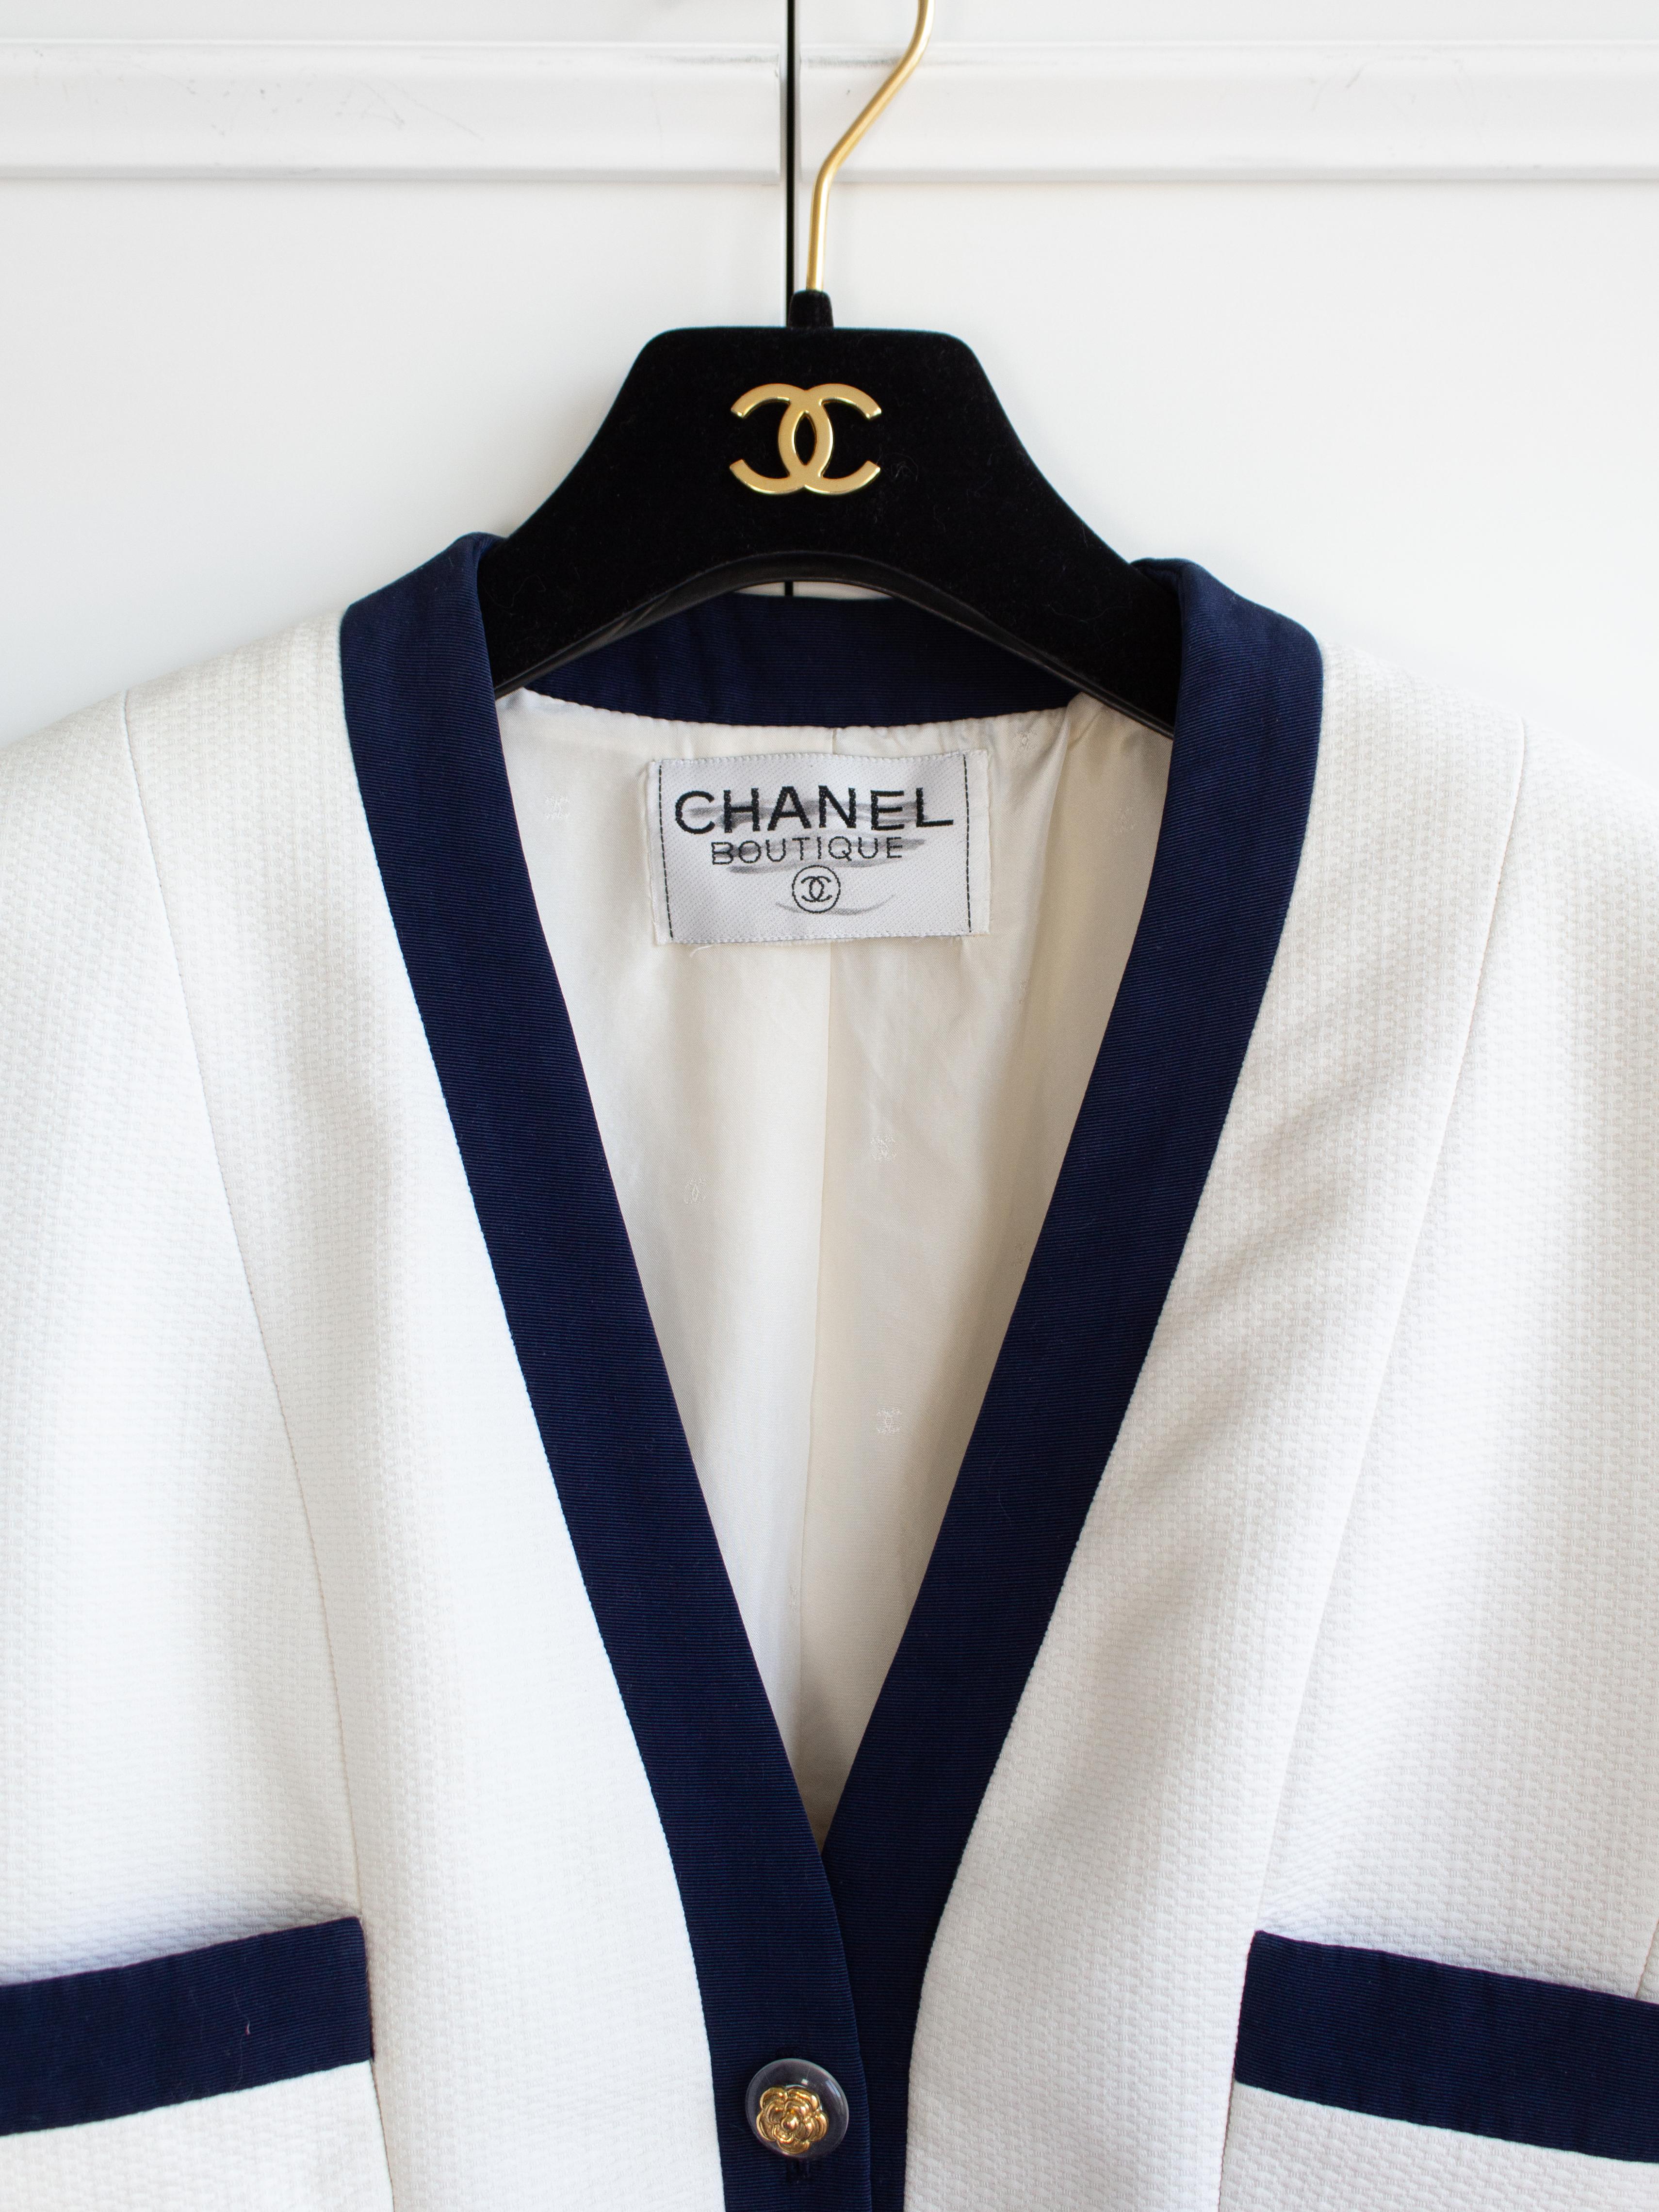 Chanel Vintage S/S 1992 Runway White Navy Lucite Gold Camellia Cotton Jacket 3